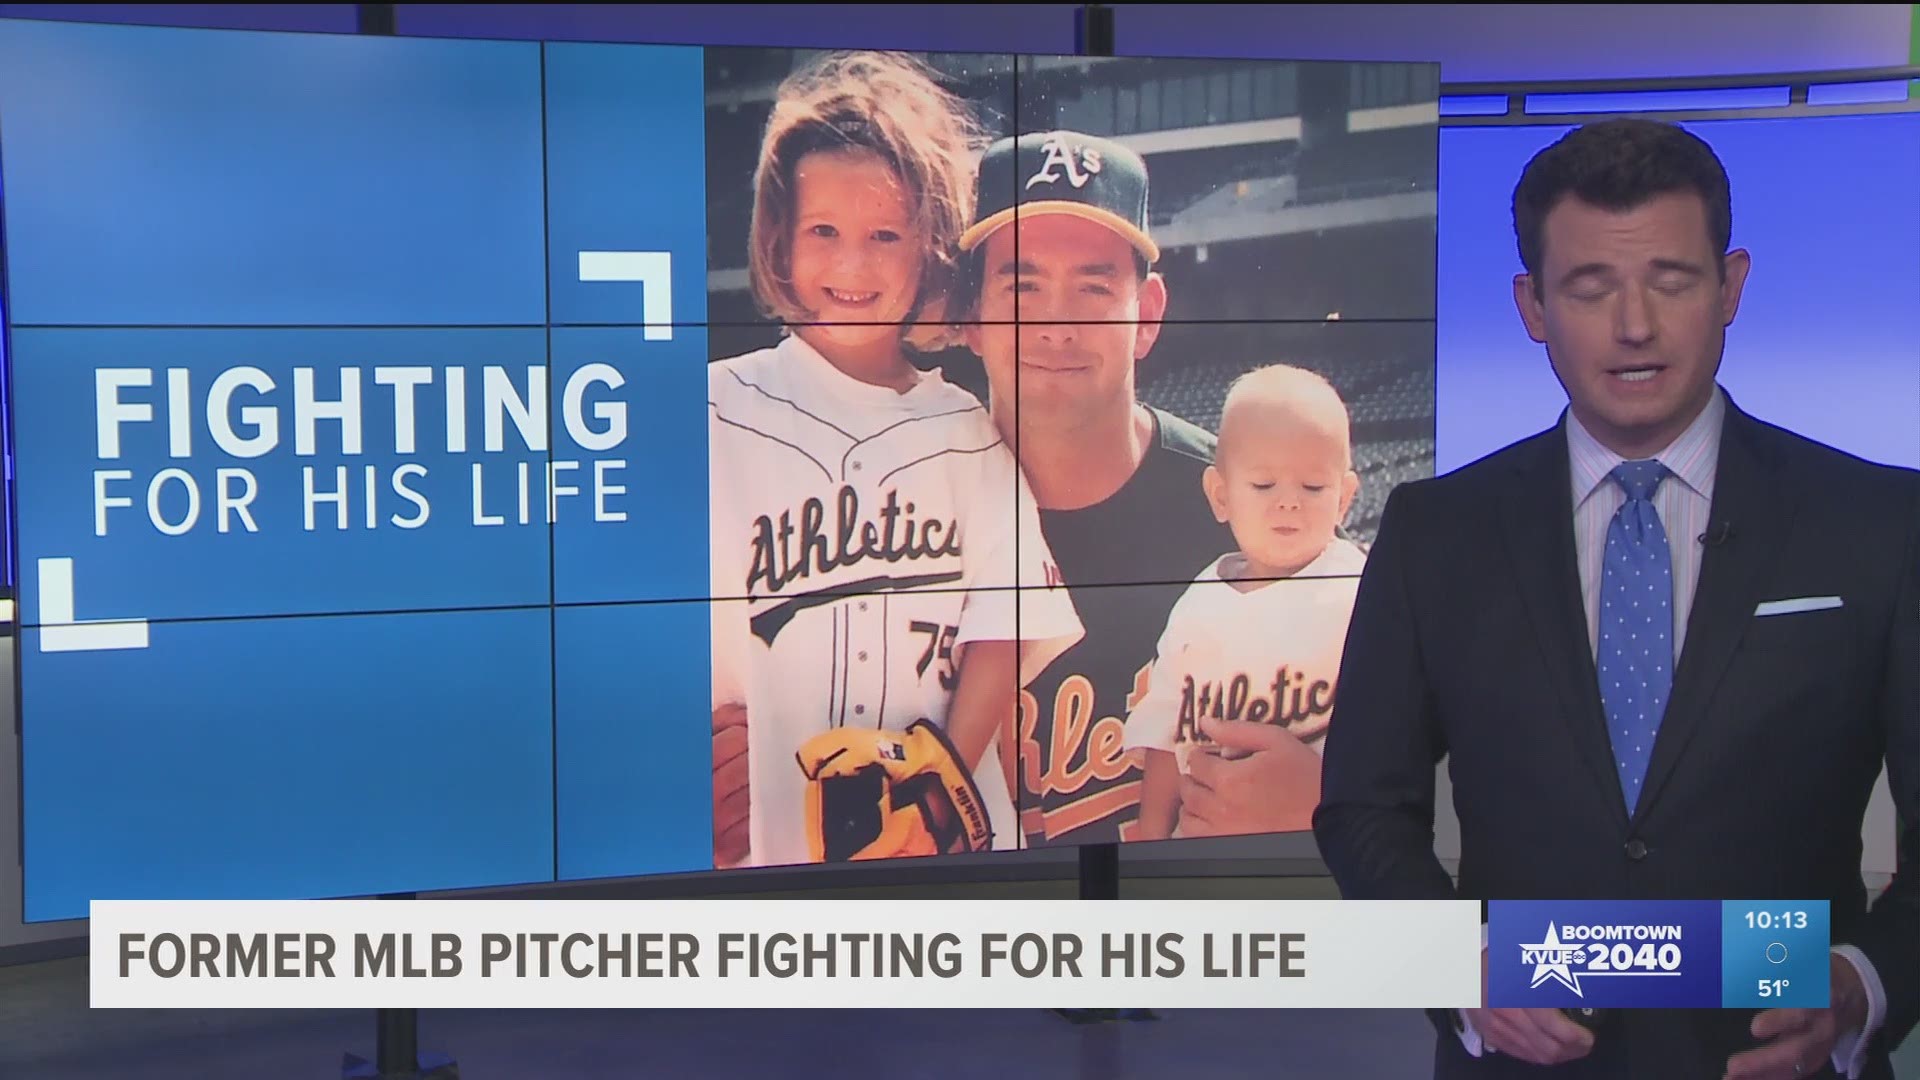 From playing in the major leagues to depending on an oxygen tank to survive. A former baseball player is in the fight of his life, years after he says his injuries ended his career.